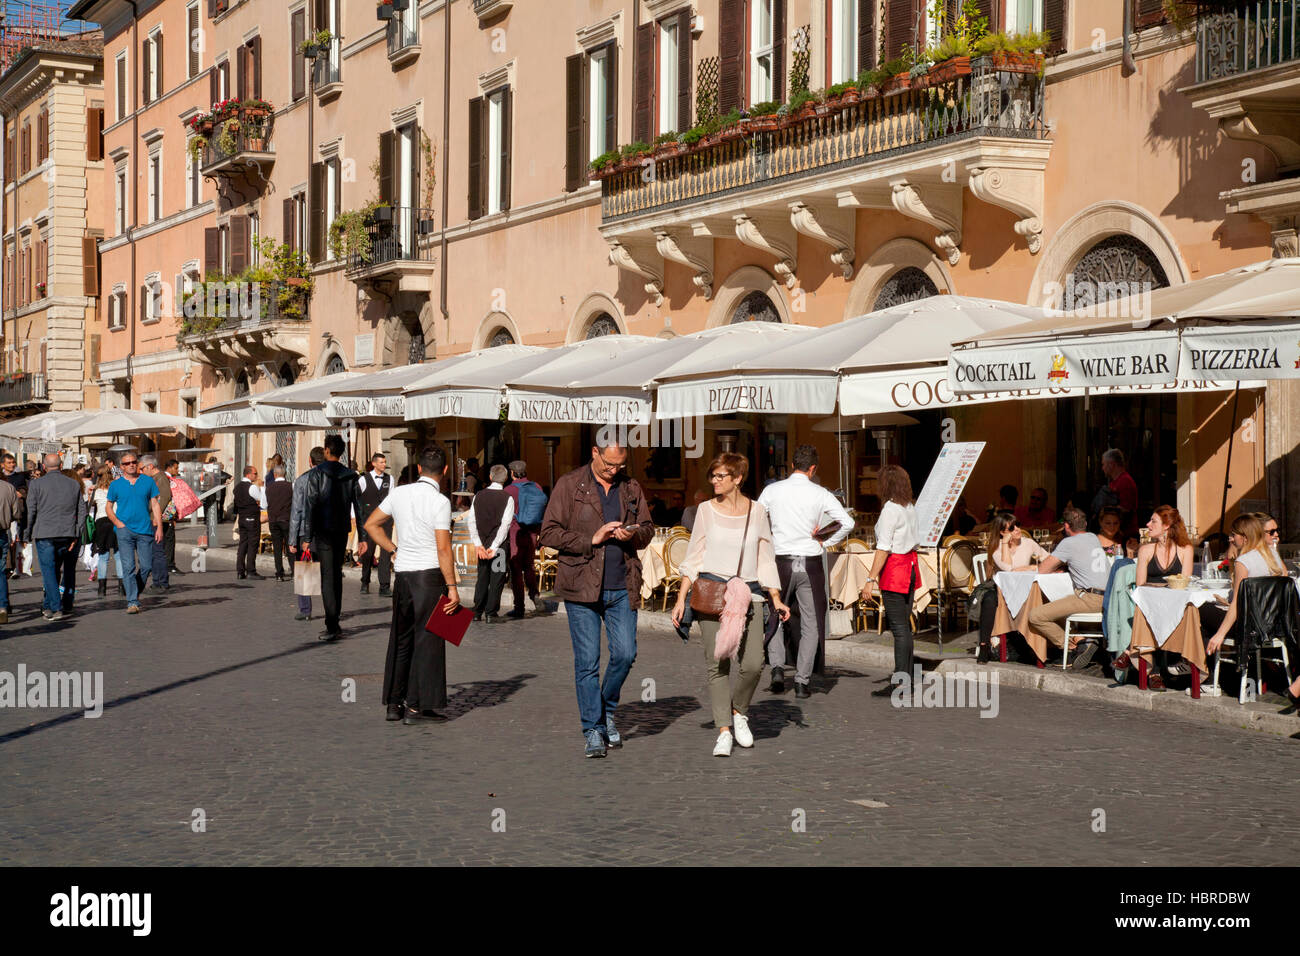 Piazza Navona, Rome, tourists dining at restaurant al fresco in the sunshine, with waiters and couple walking by Stock Photo